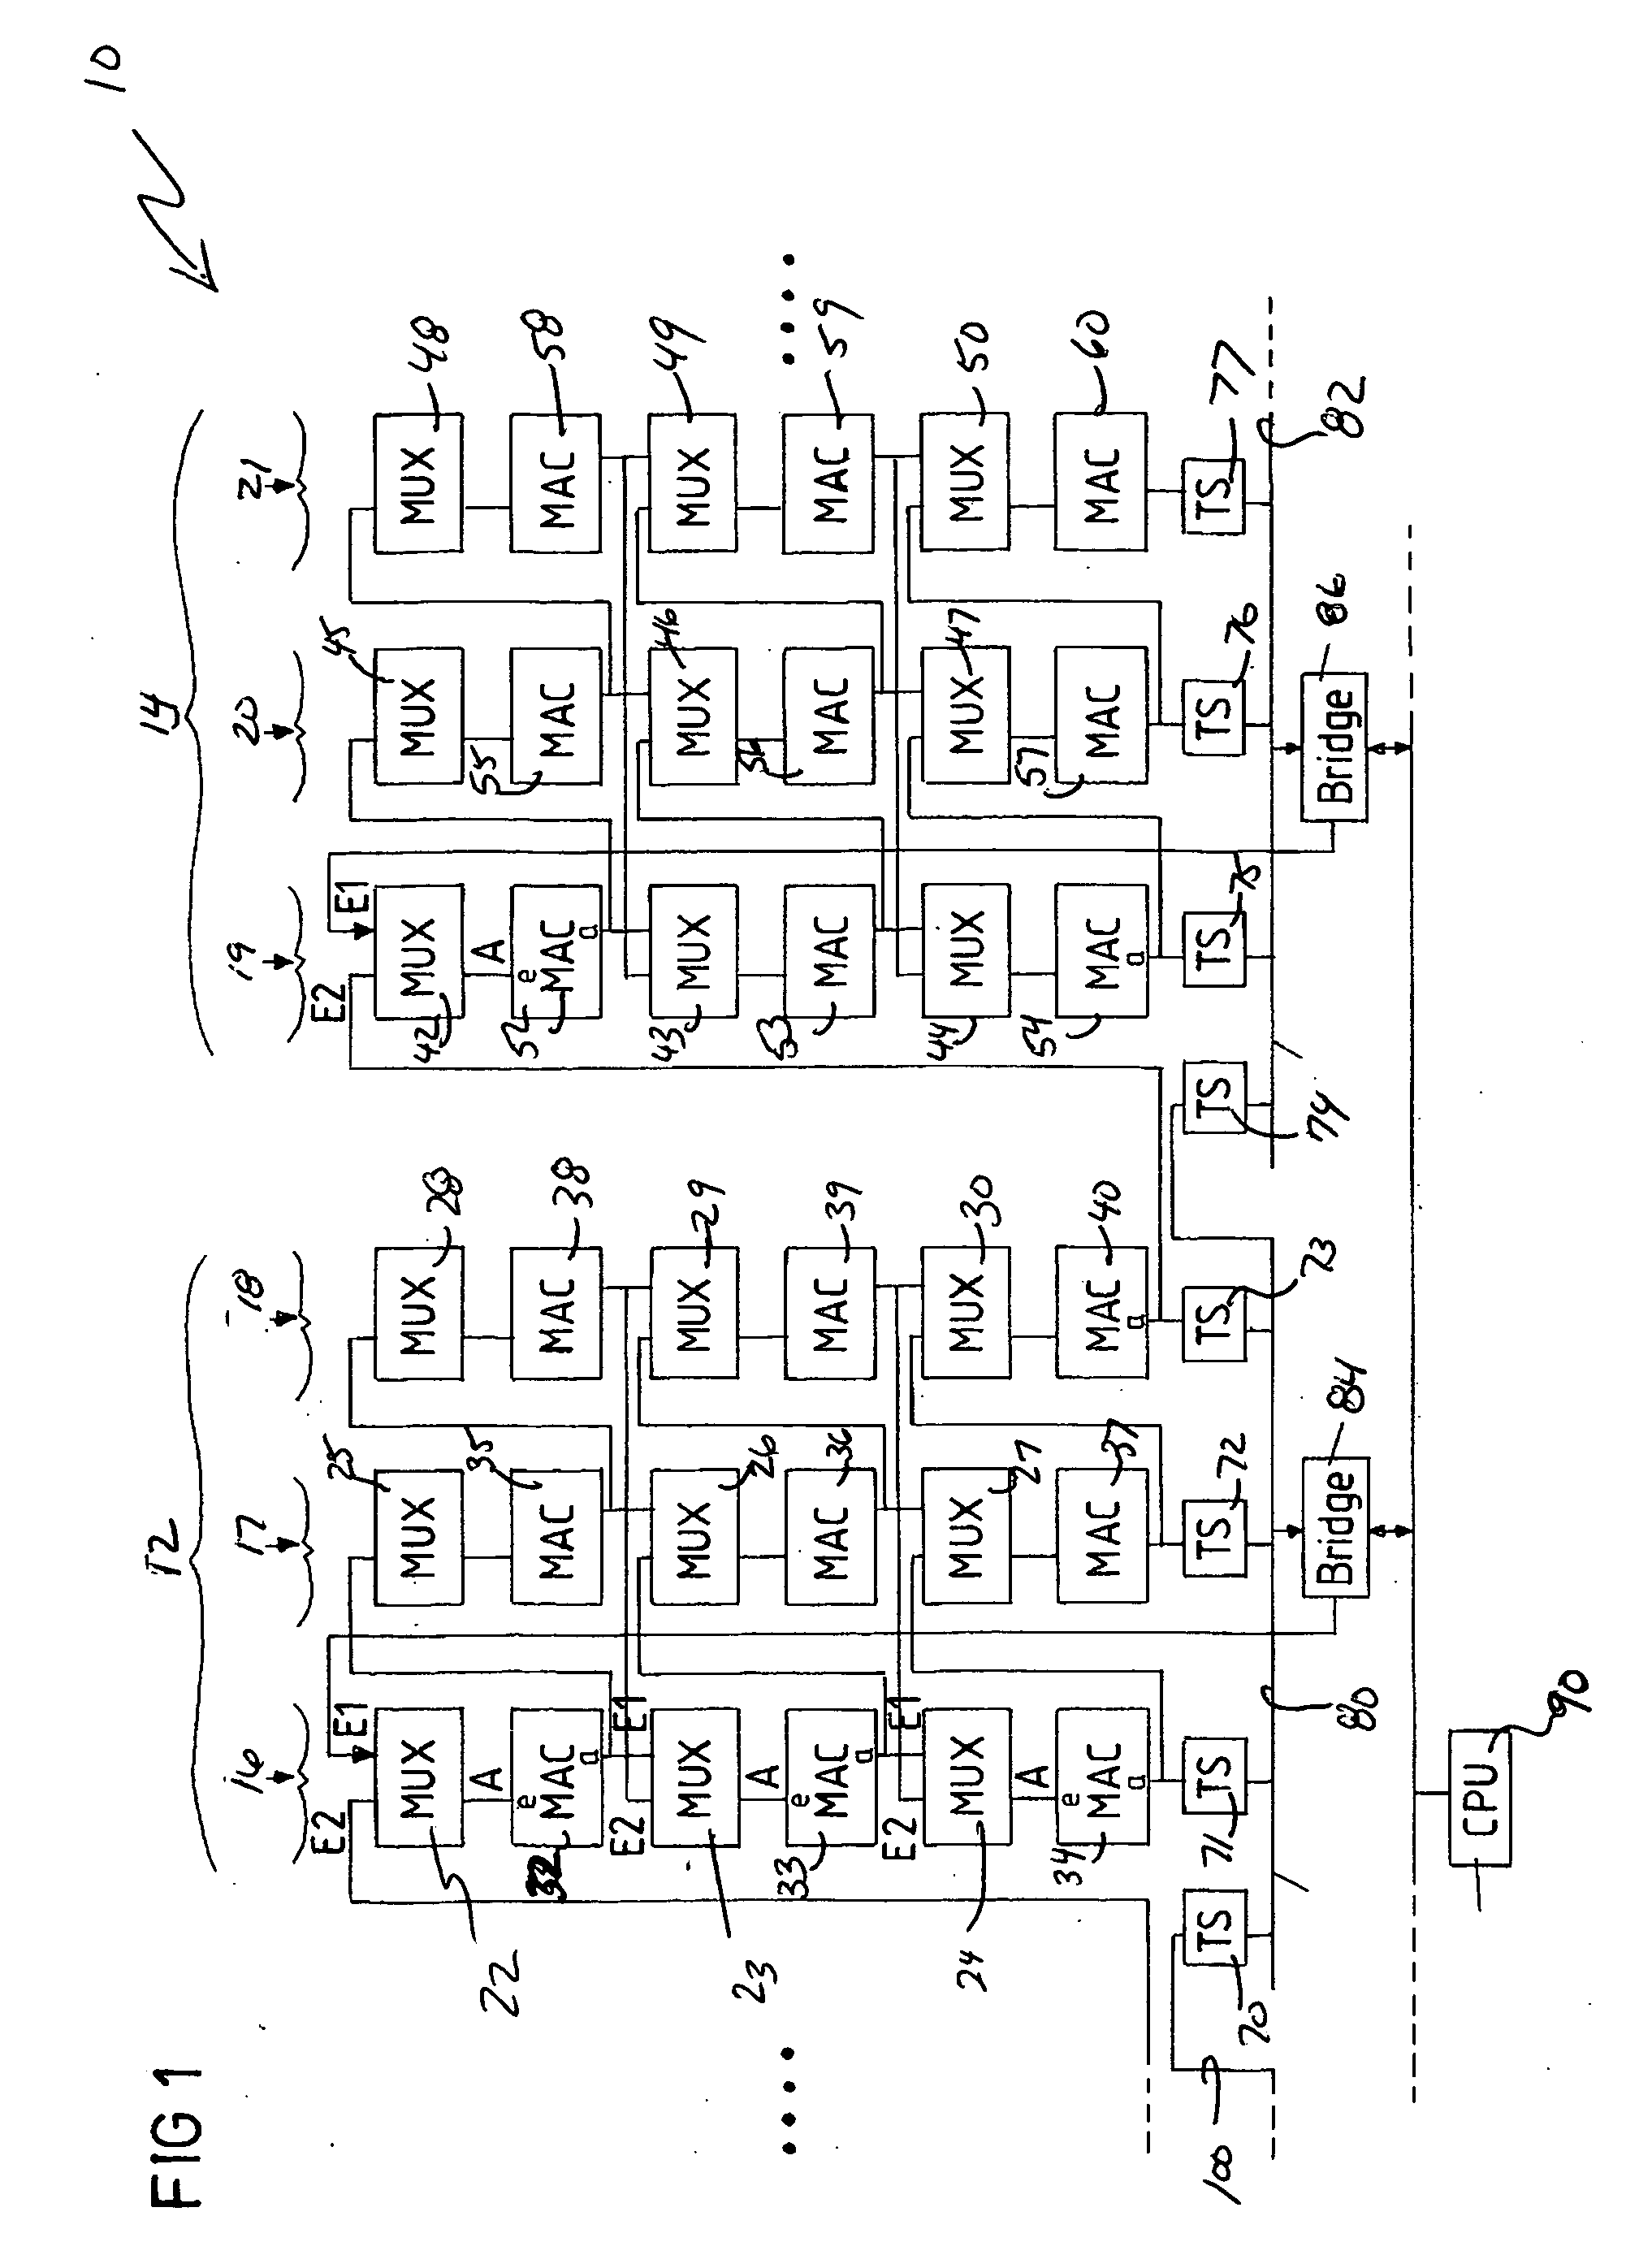 Circuit architecture for an integrated circuit